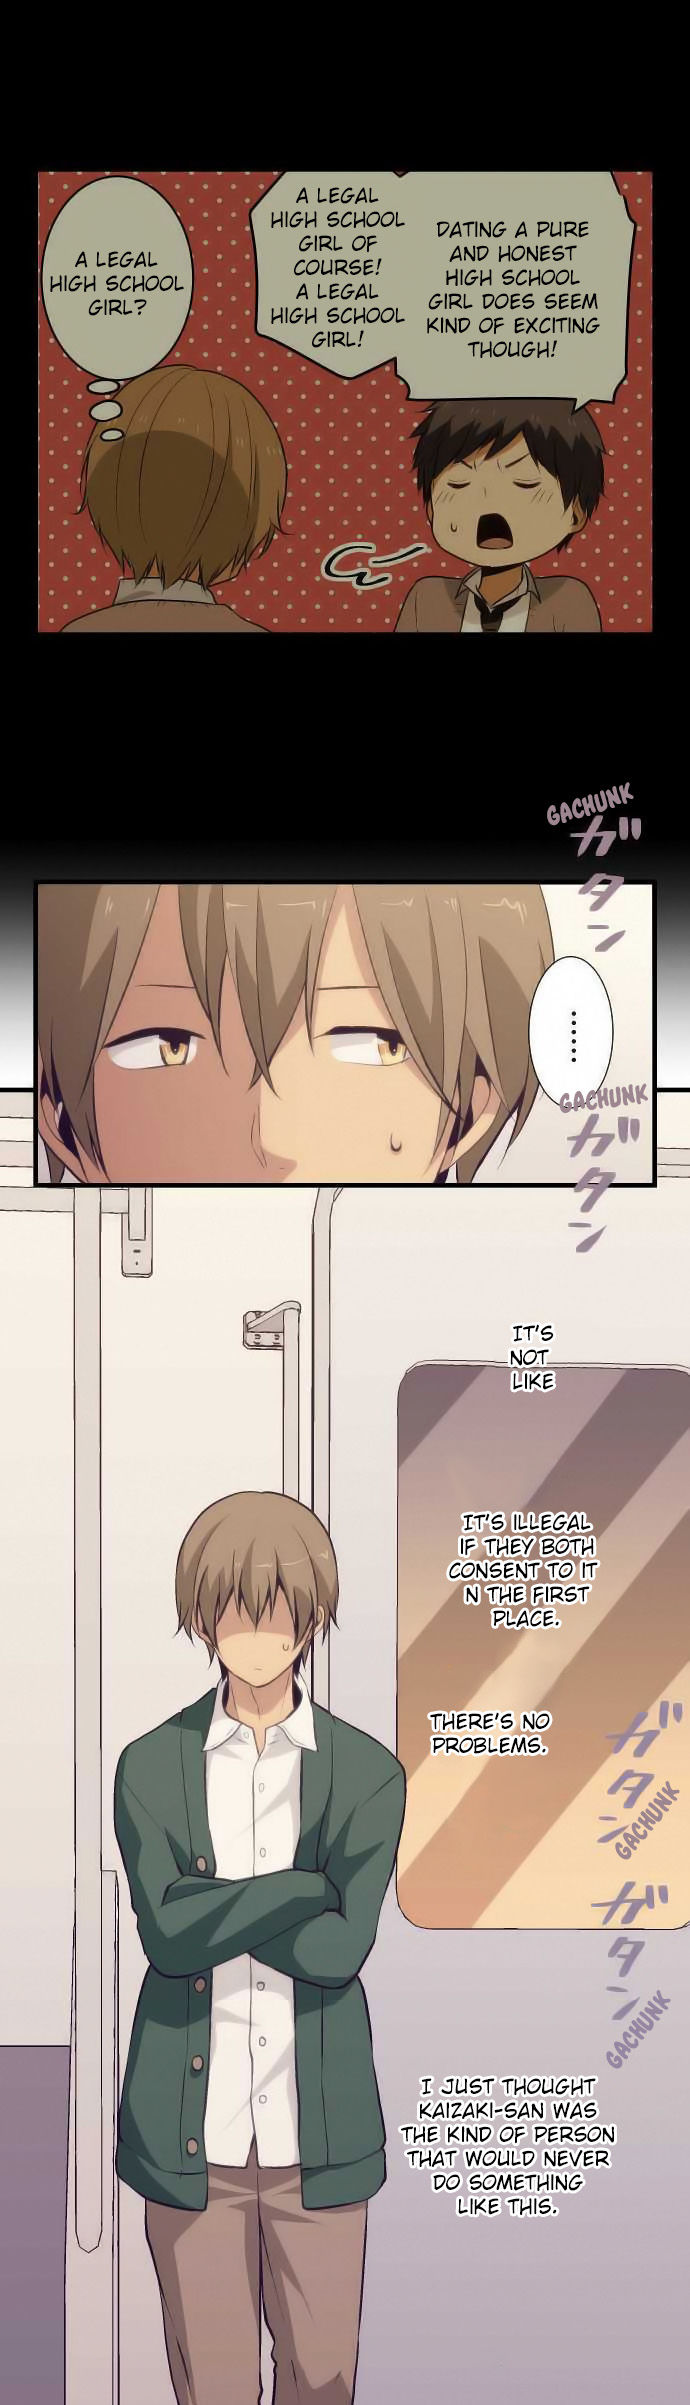 ReLIFE 51